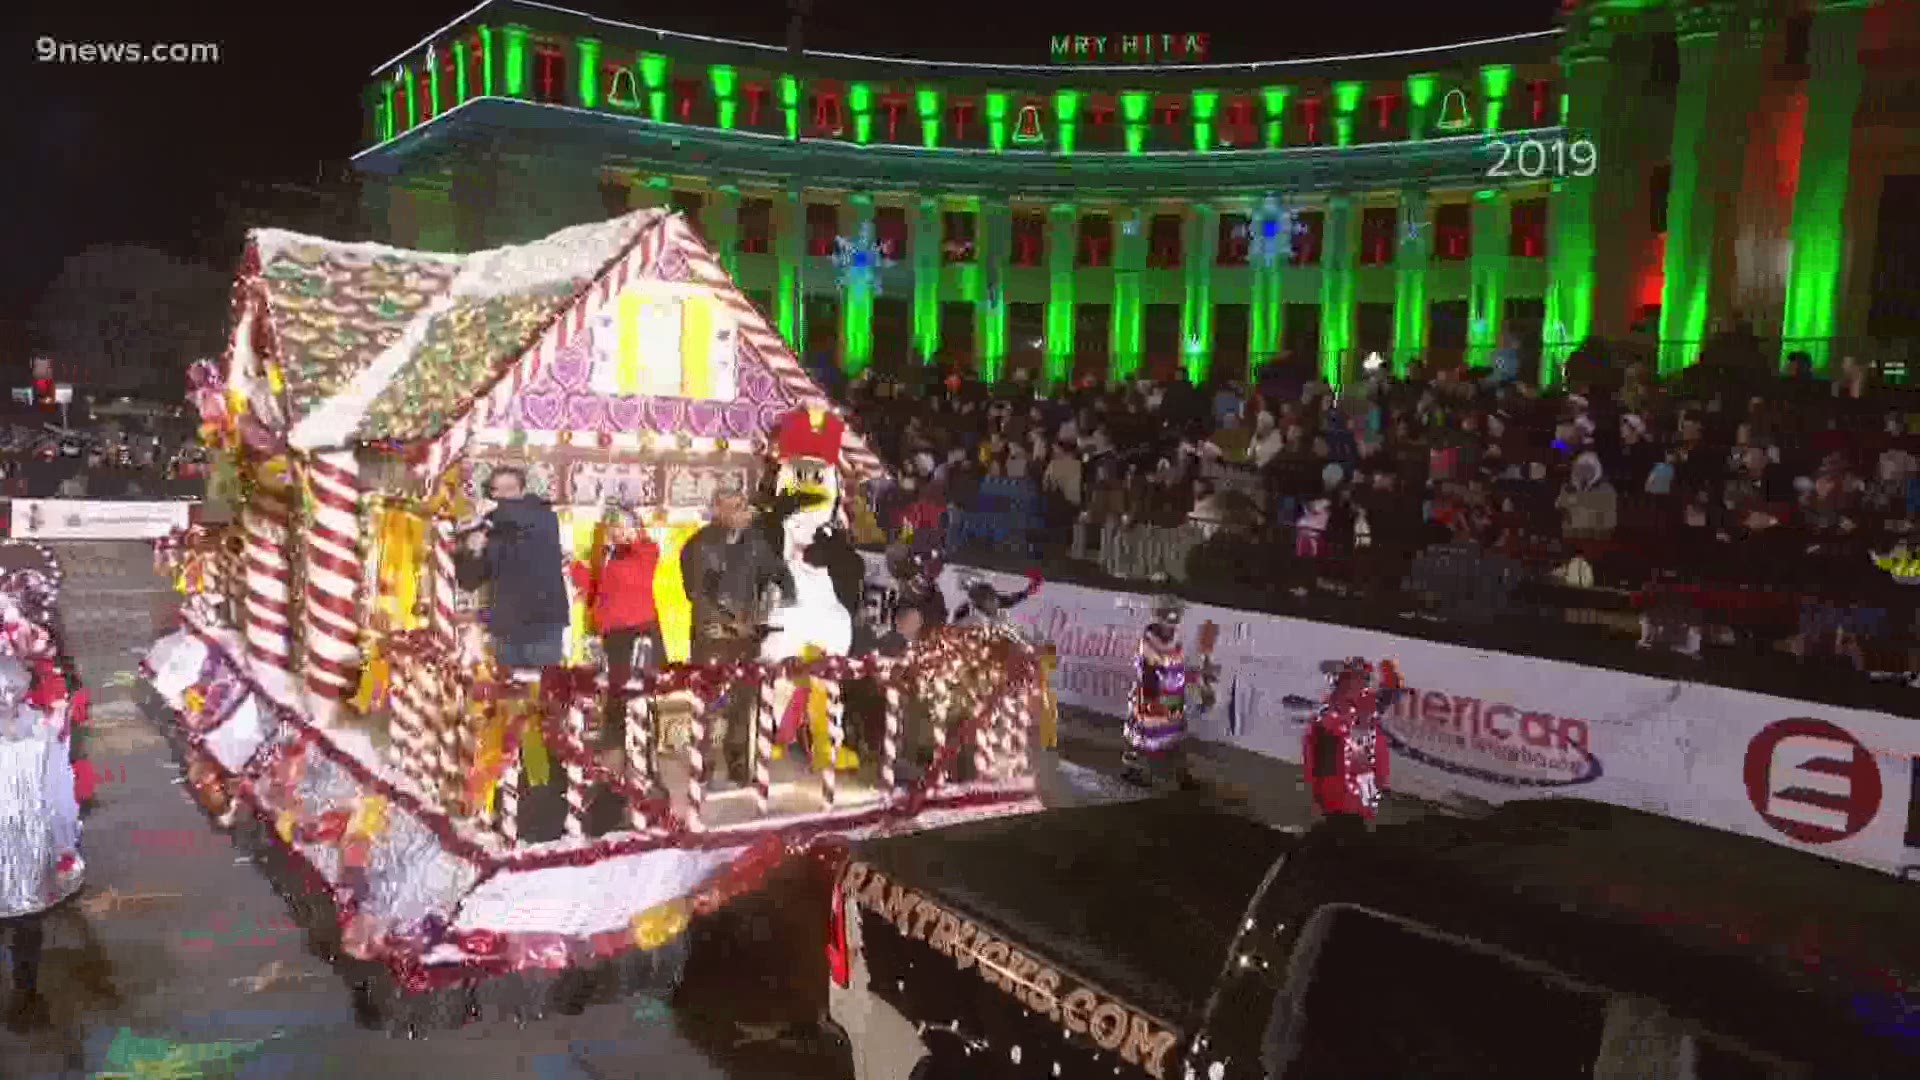 Upload a short video sharing your Parade of Lights memories, and 9NEWS might air it during our hour-long special.